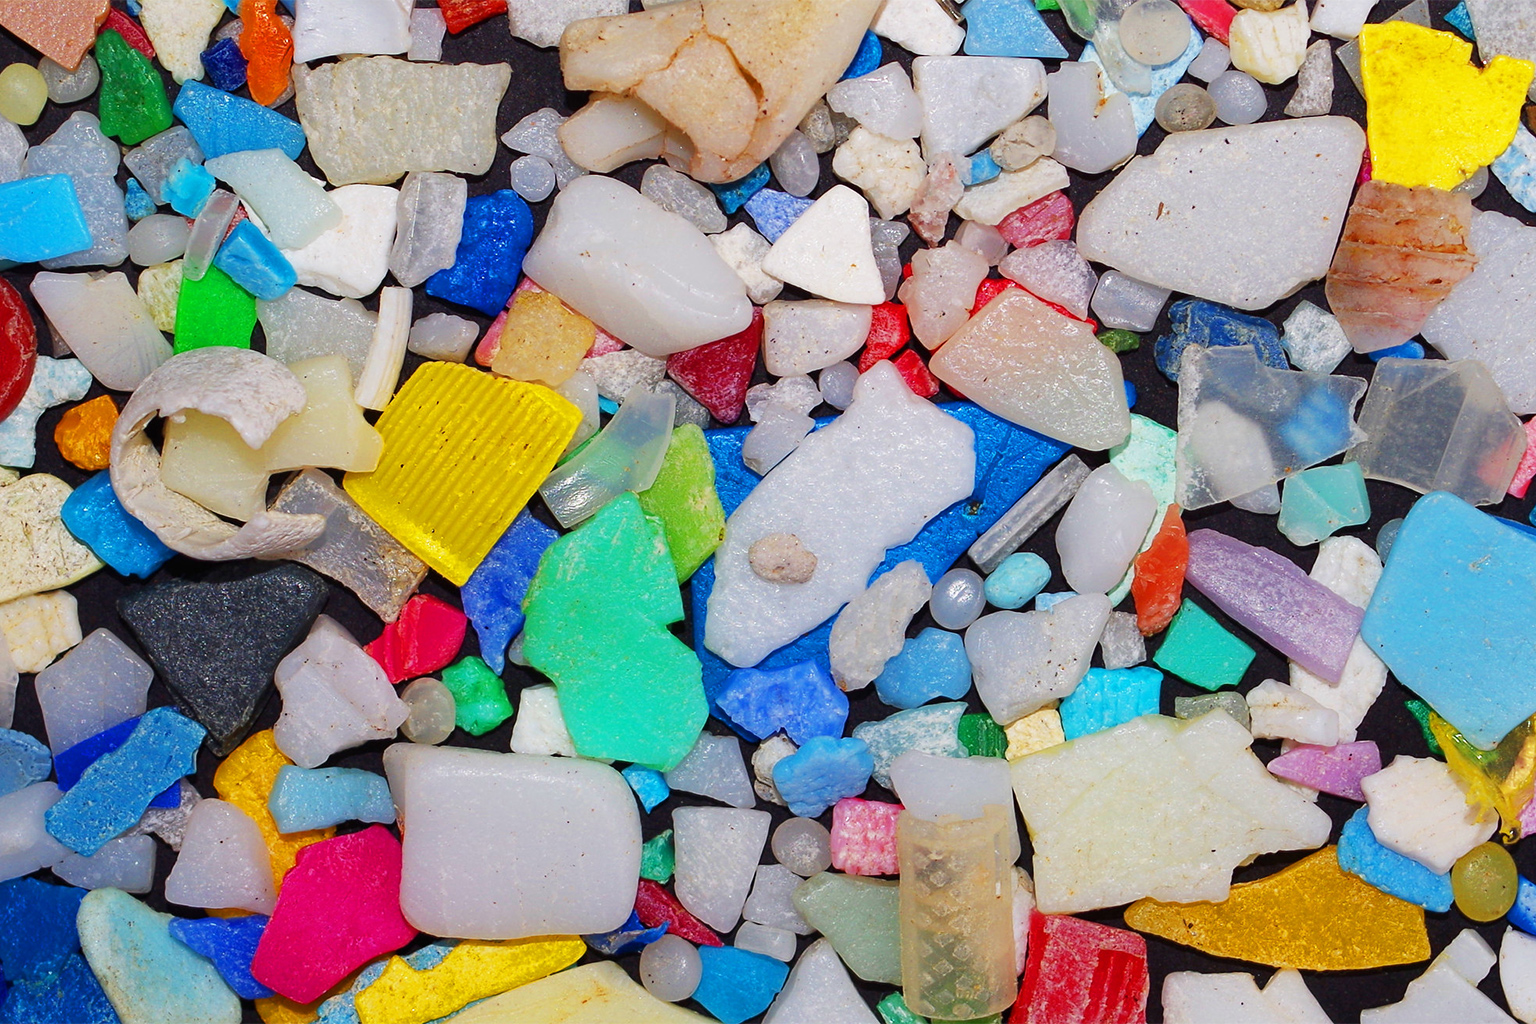 Plastics of all shapes, sizes, colors and composition enter the ocean every day, with largely unknown impacts. 